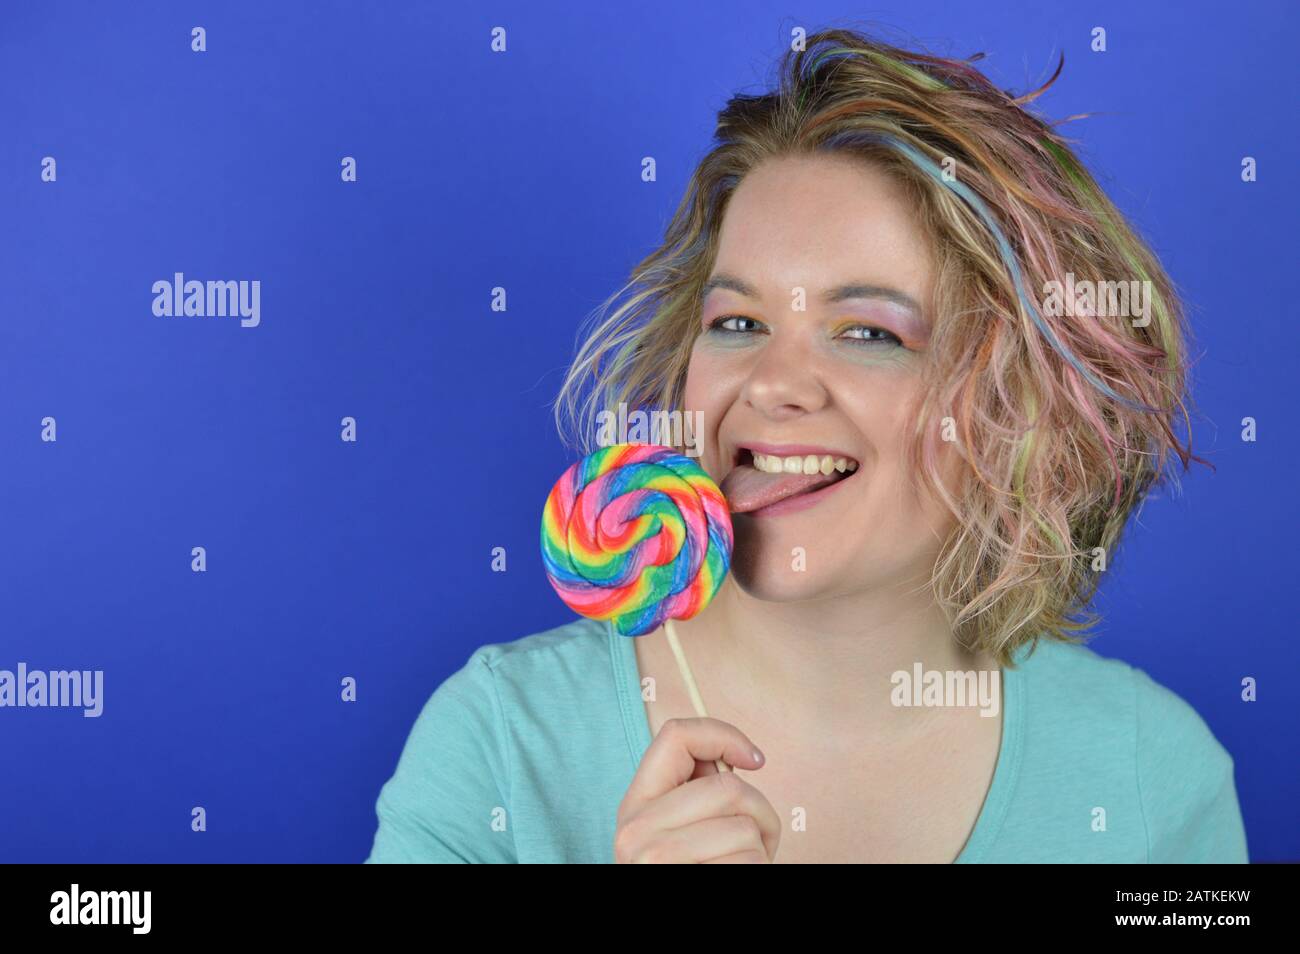 portrait of a young blond woman with colourful hair licking at a big lollipop and looking into the camera Stock Photo